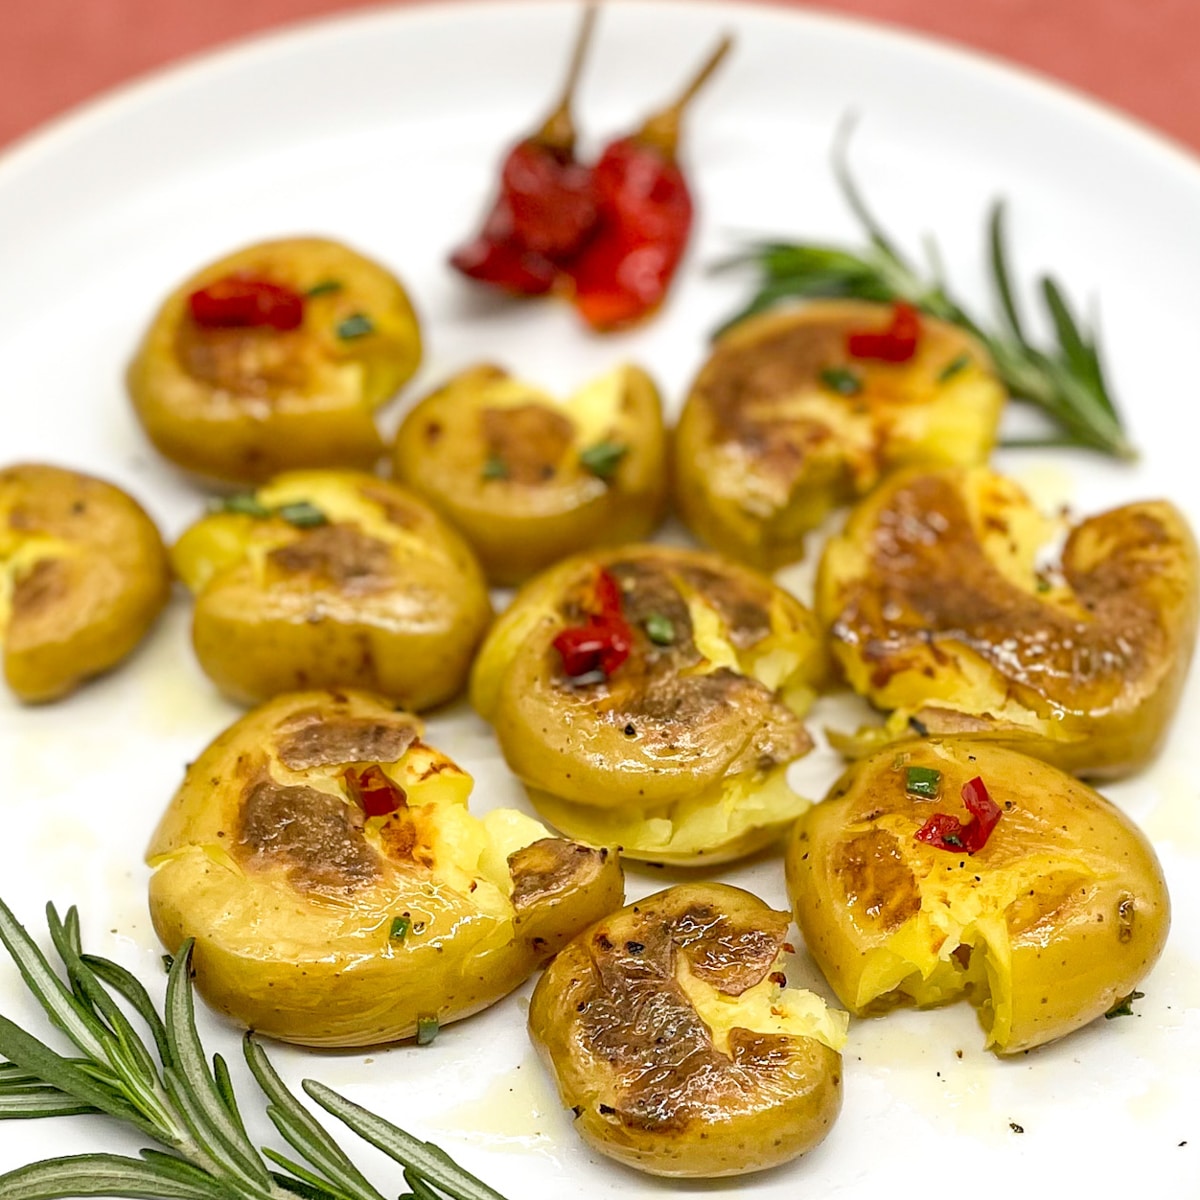 Smashed, pan-fried baby yellow potatoes with rosemary and Calabrian chilis coated in a vinaigrette on white plate with a red background.